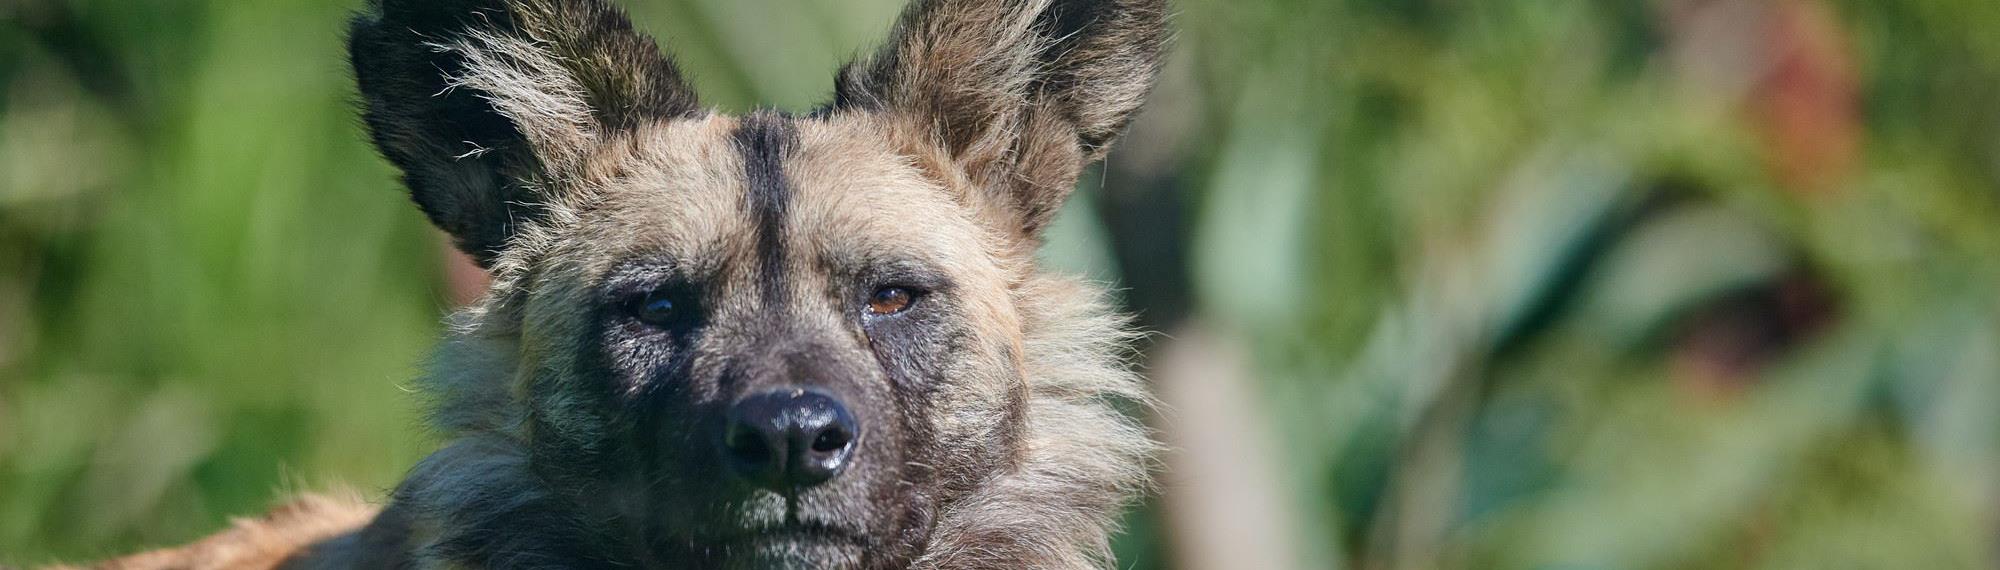 African Wild Dog staring sternly at the camera. Good detail of large ears and fur. 